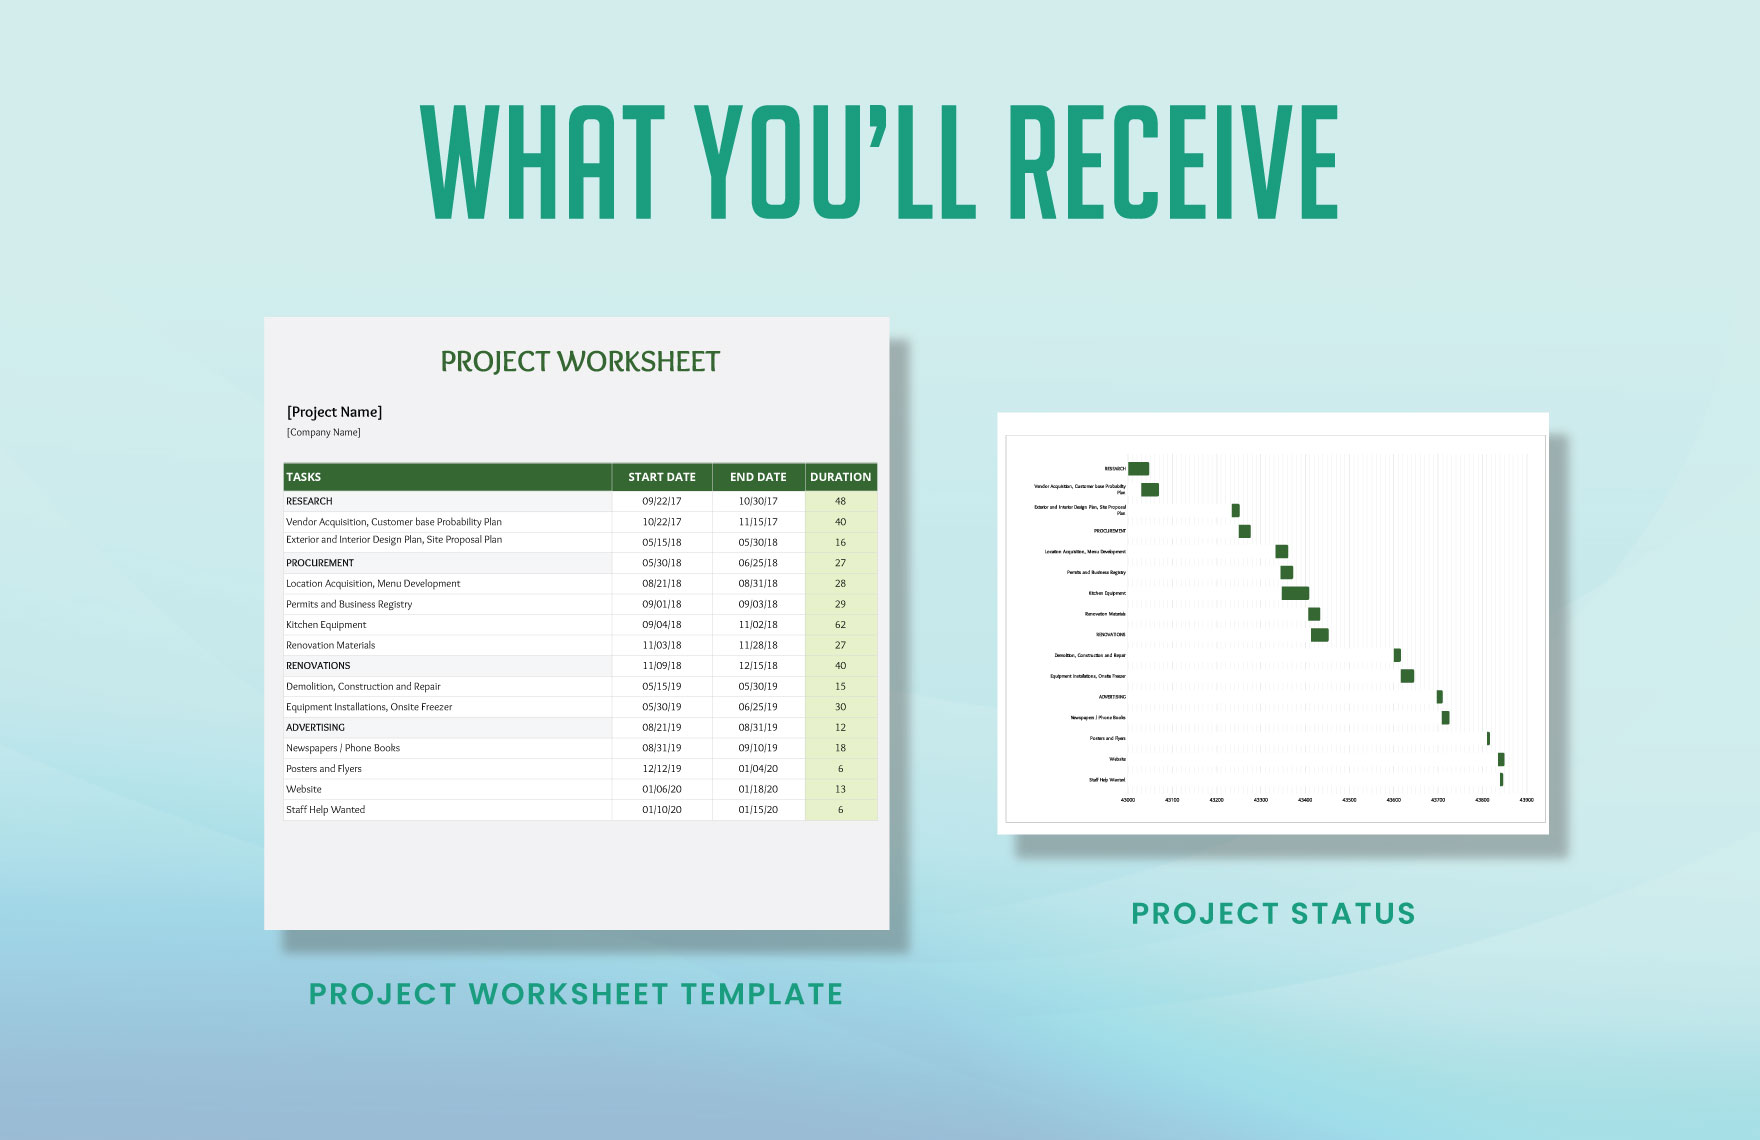 Project Worksheet Template